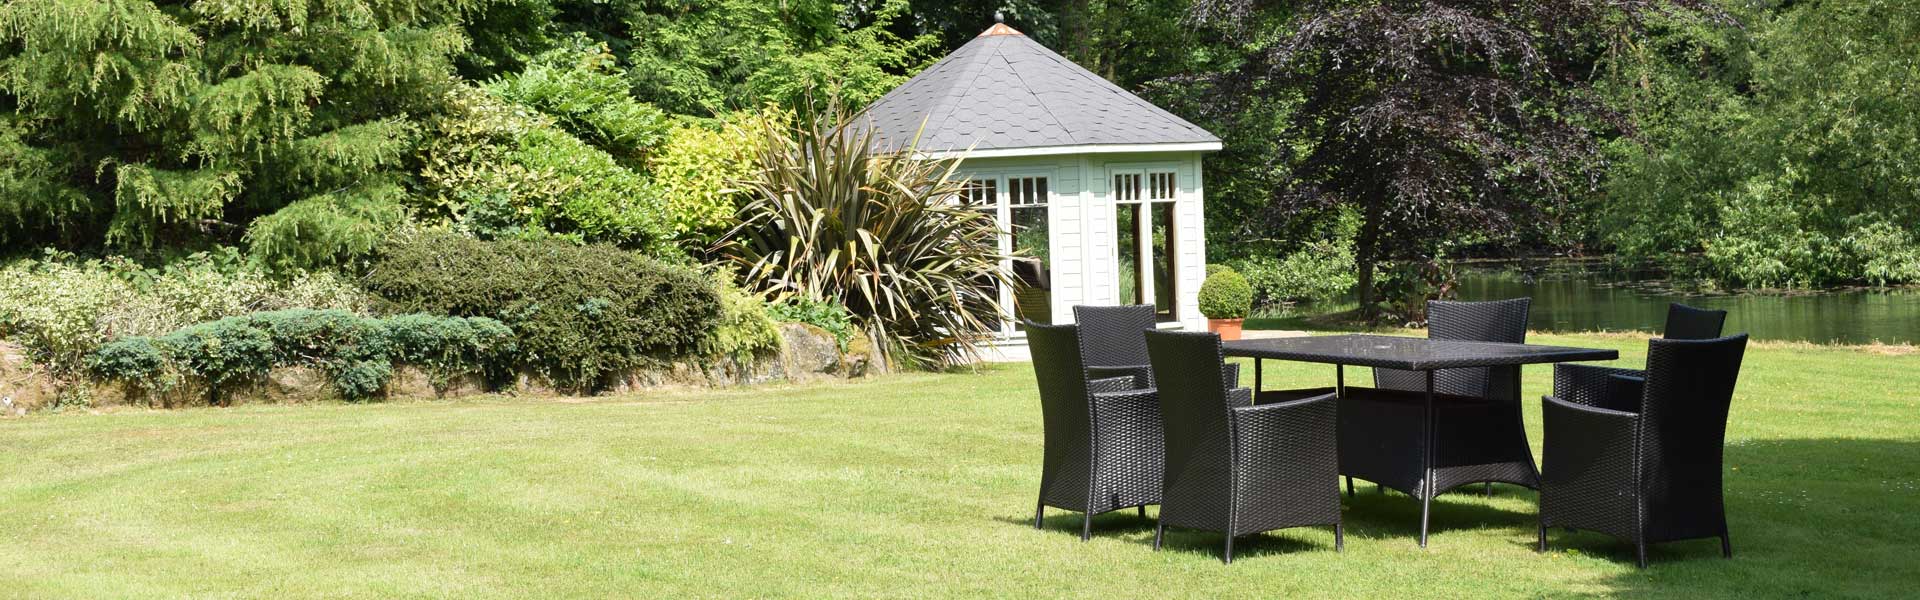 self catering cottages lancashire